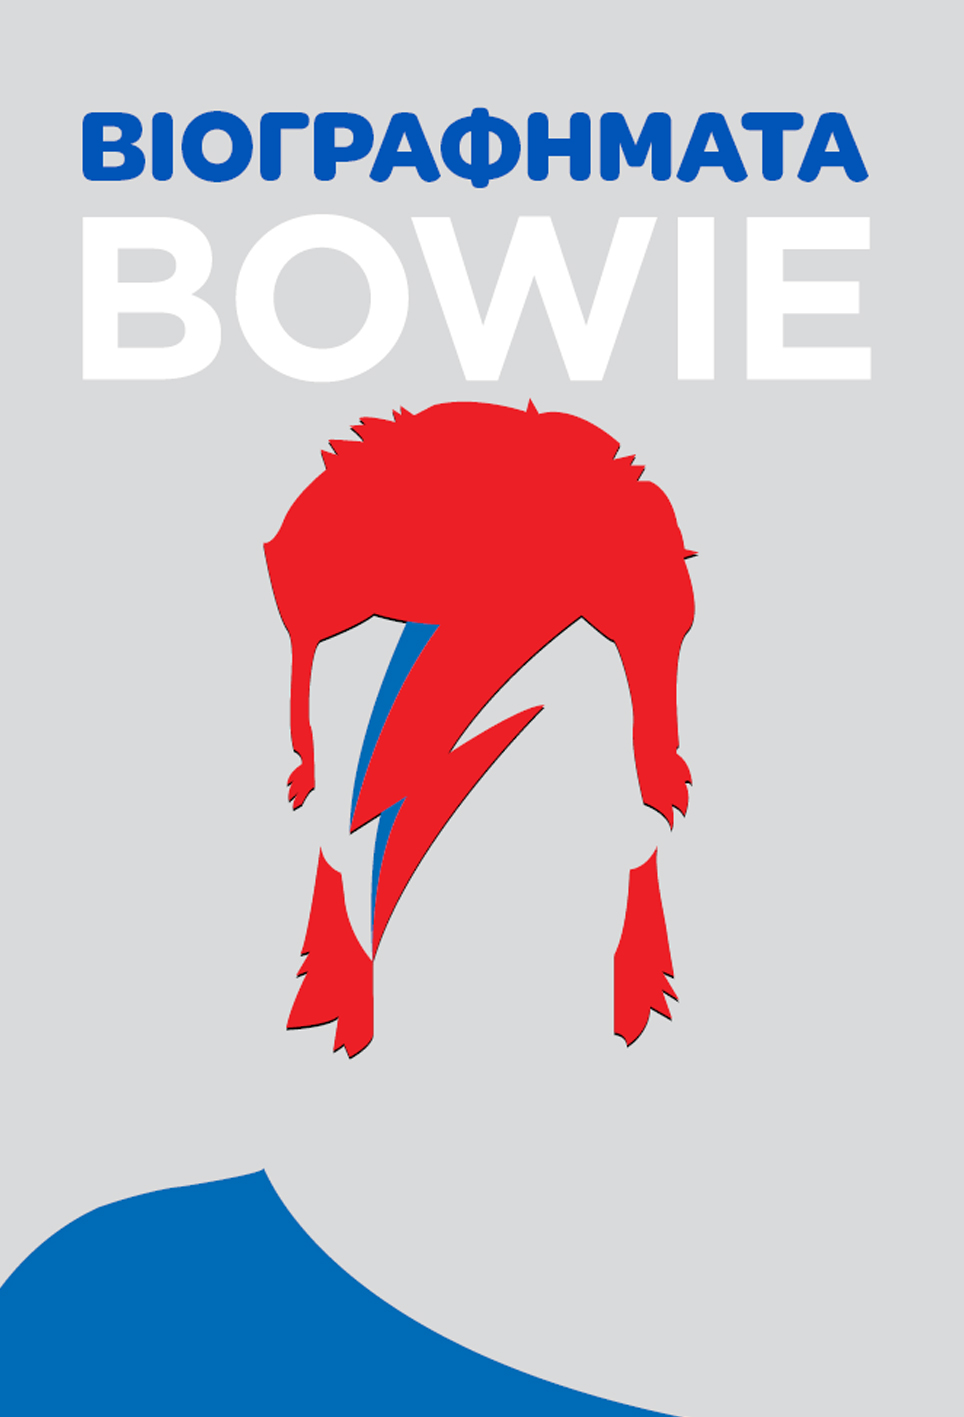 : Bowie